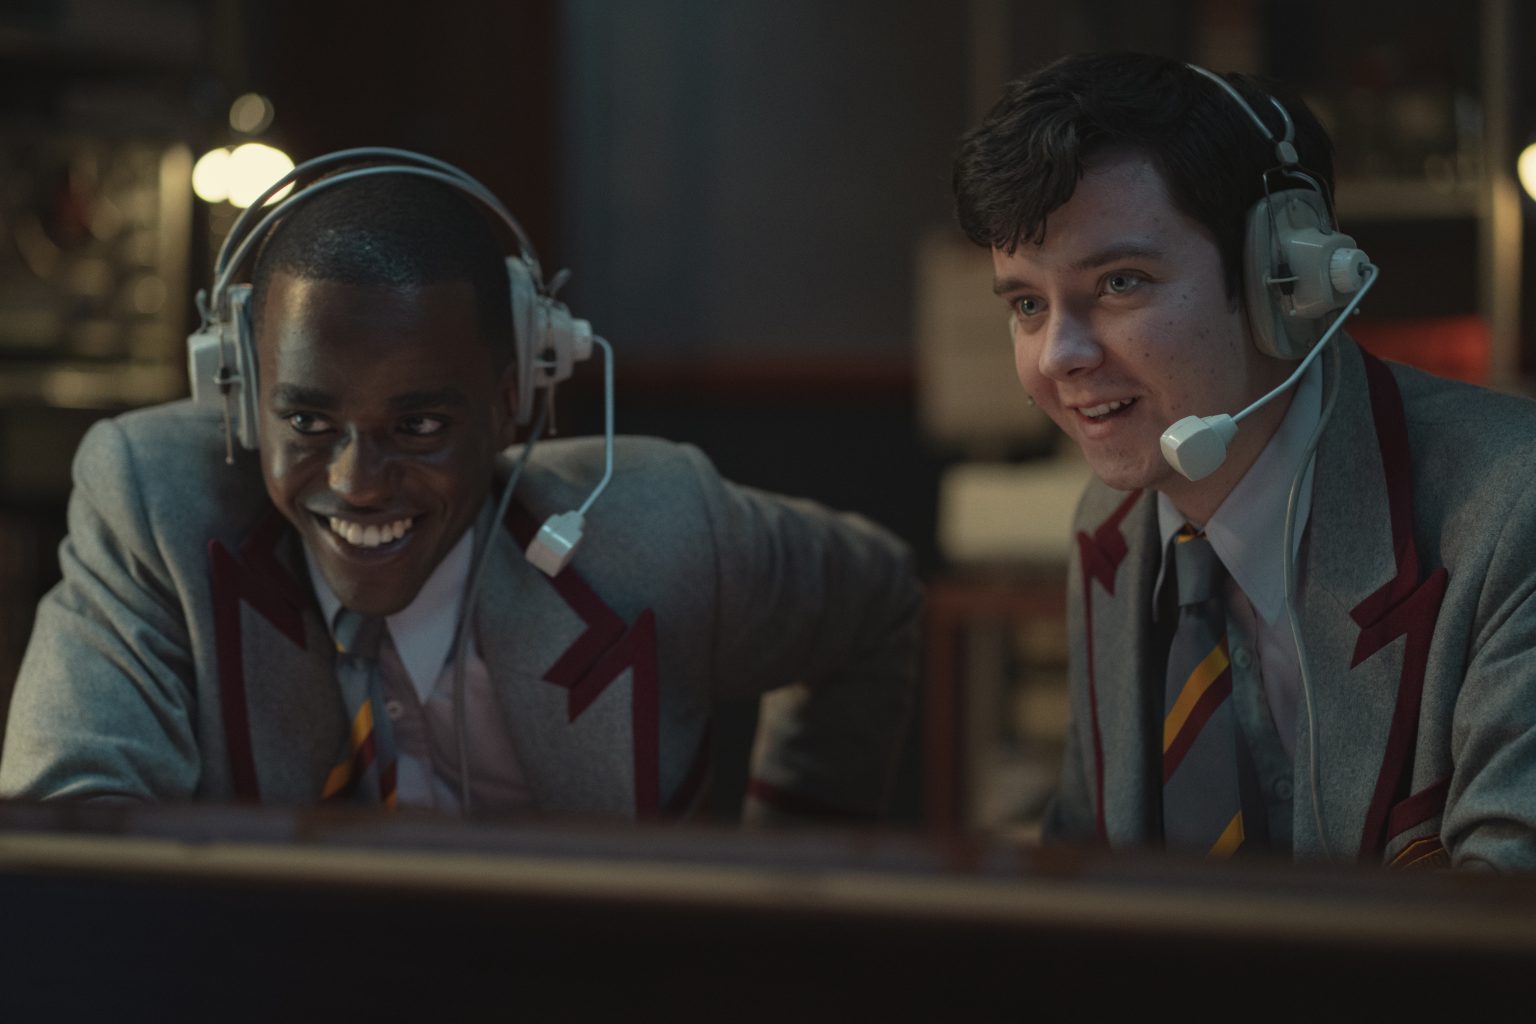 Ncuti Gatwa and Asa Butterfield in the new school uniforms for SEX EDUCATION season 3 on Netflix.